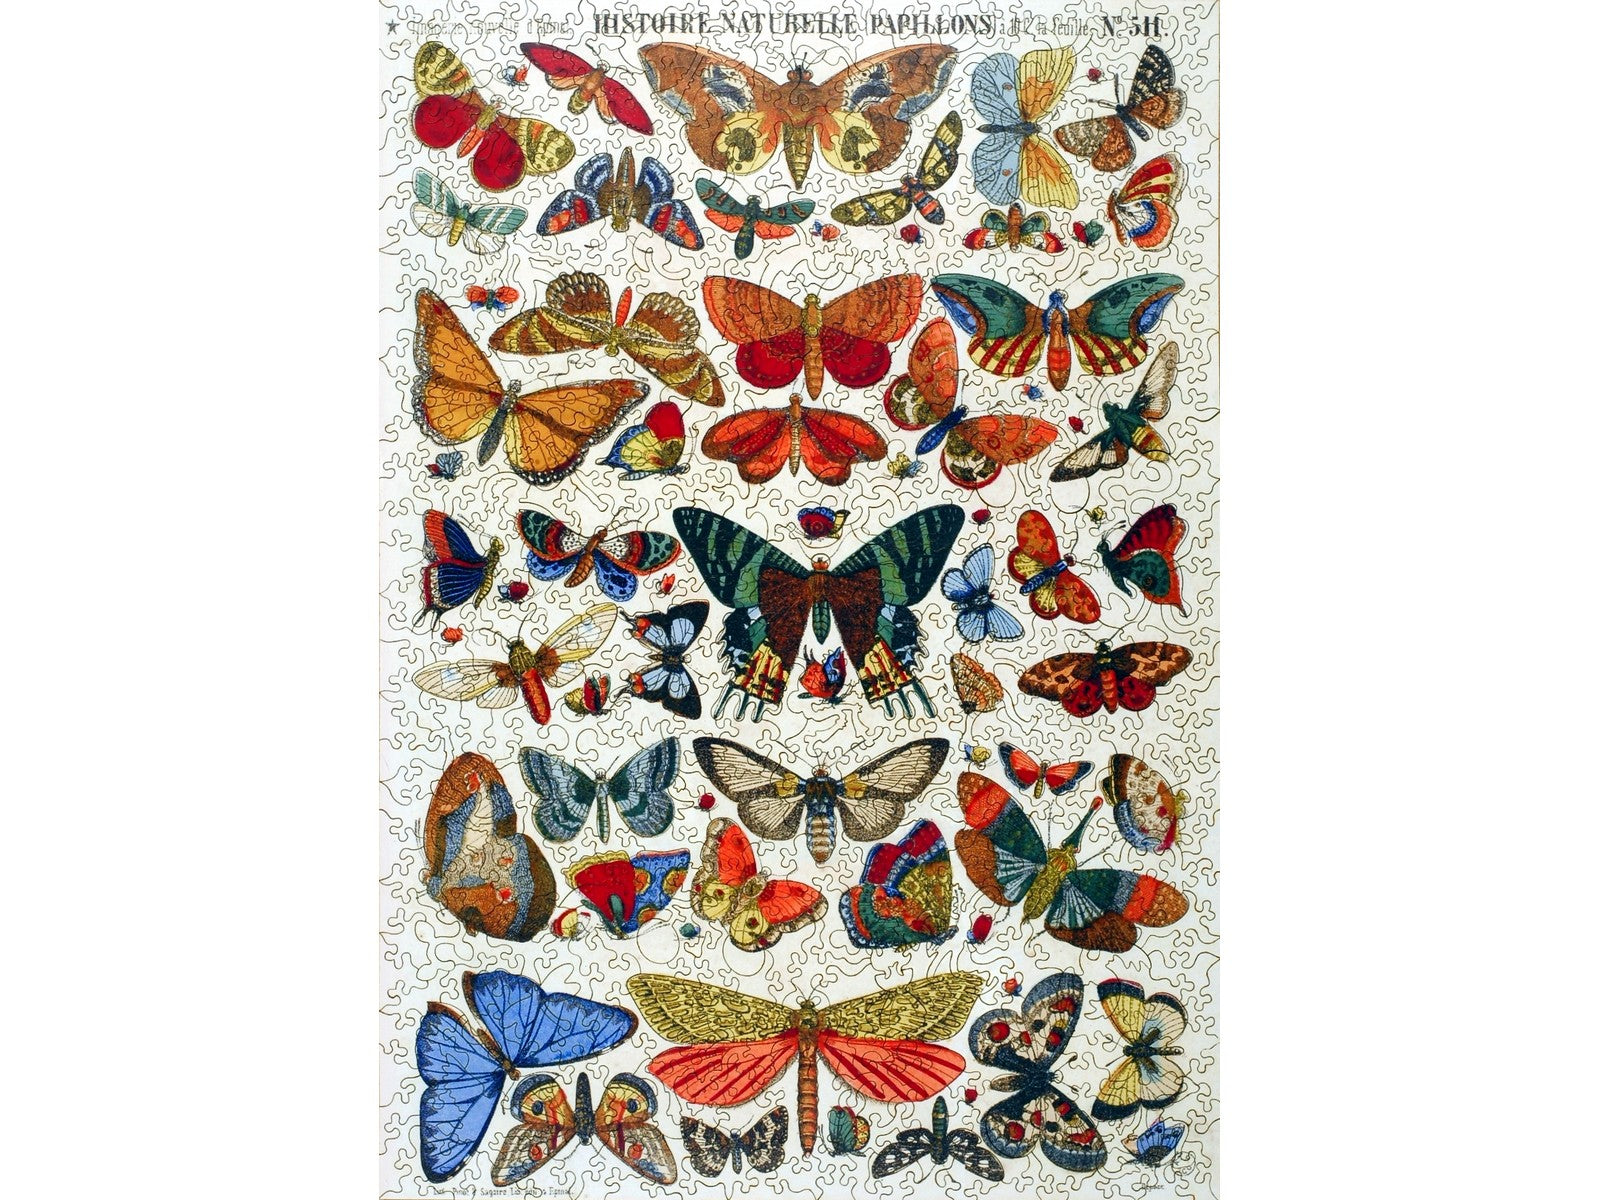 The front of the puzzle, Histoire Naturelle, which shows a vintage reference poster of different kinds of butterflies and moths.